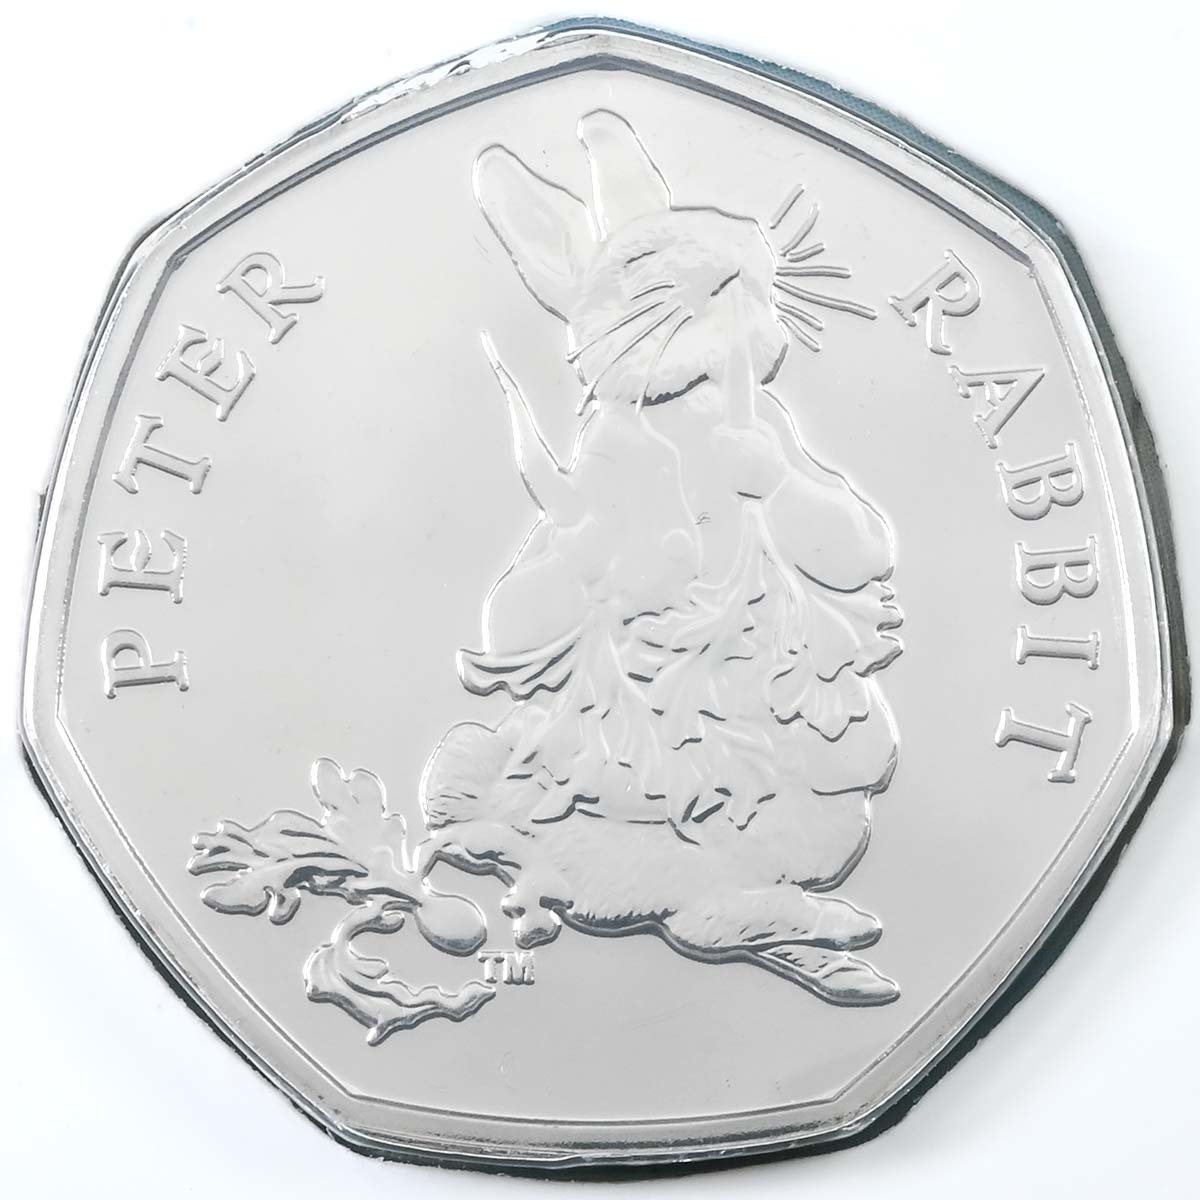 UK18PRBU 2018 Beatrix Potter Peter Rabbit Fifty Pence Brilliant Uncirculated Coin In Folder Reverse